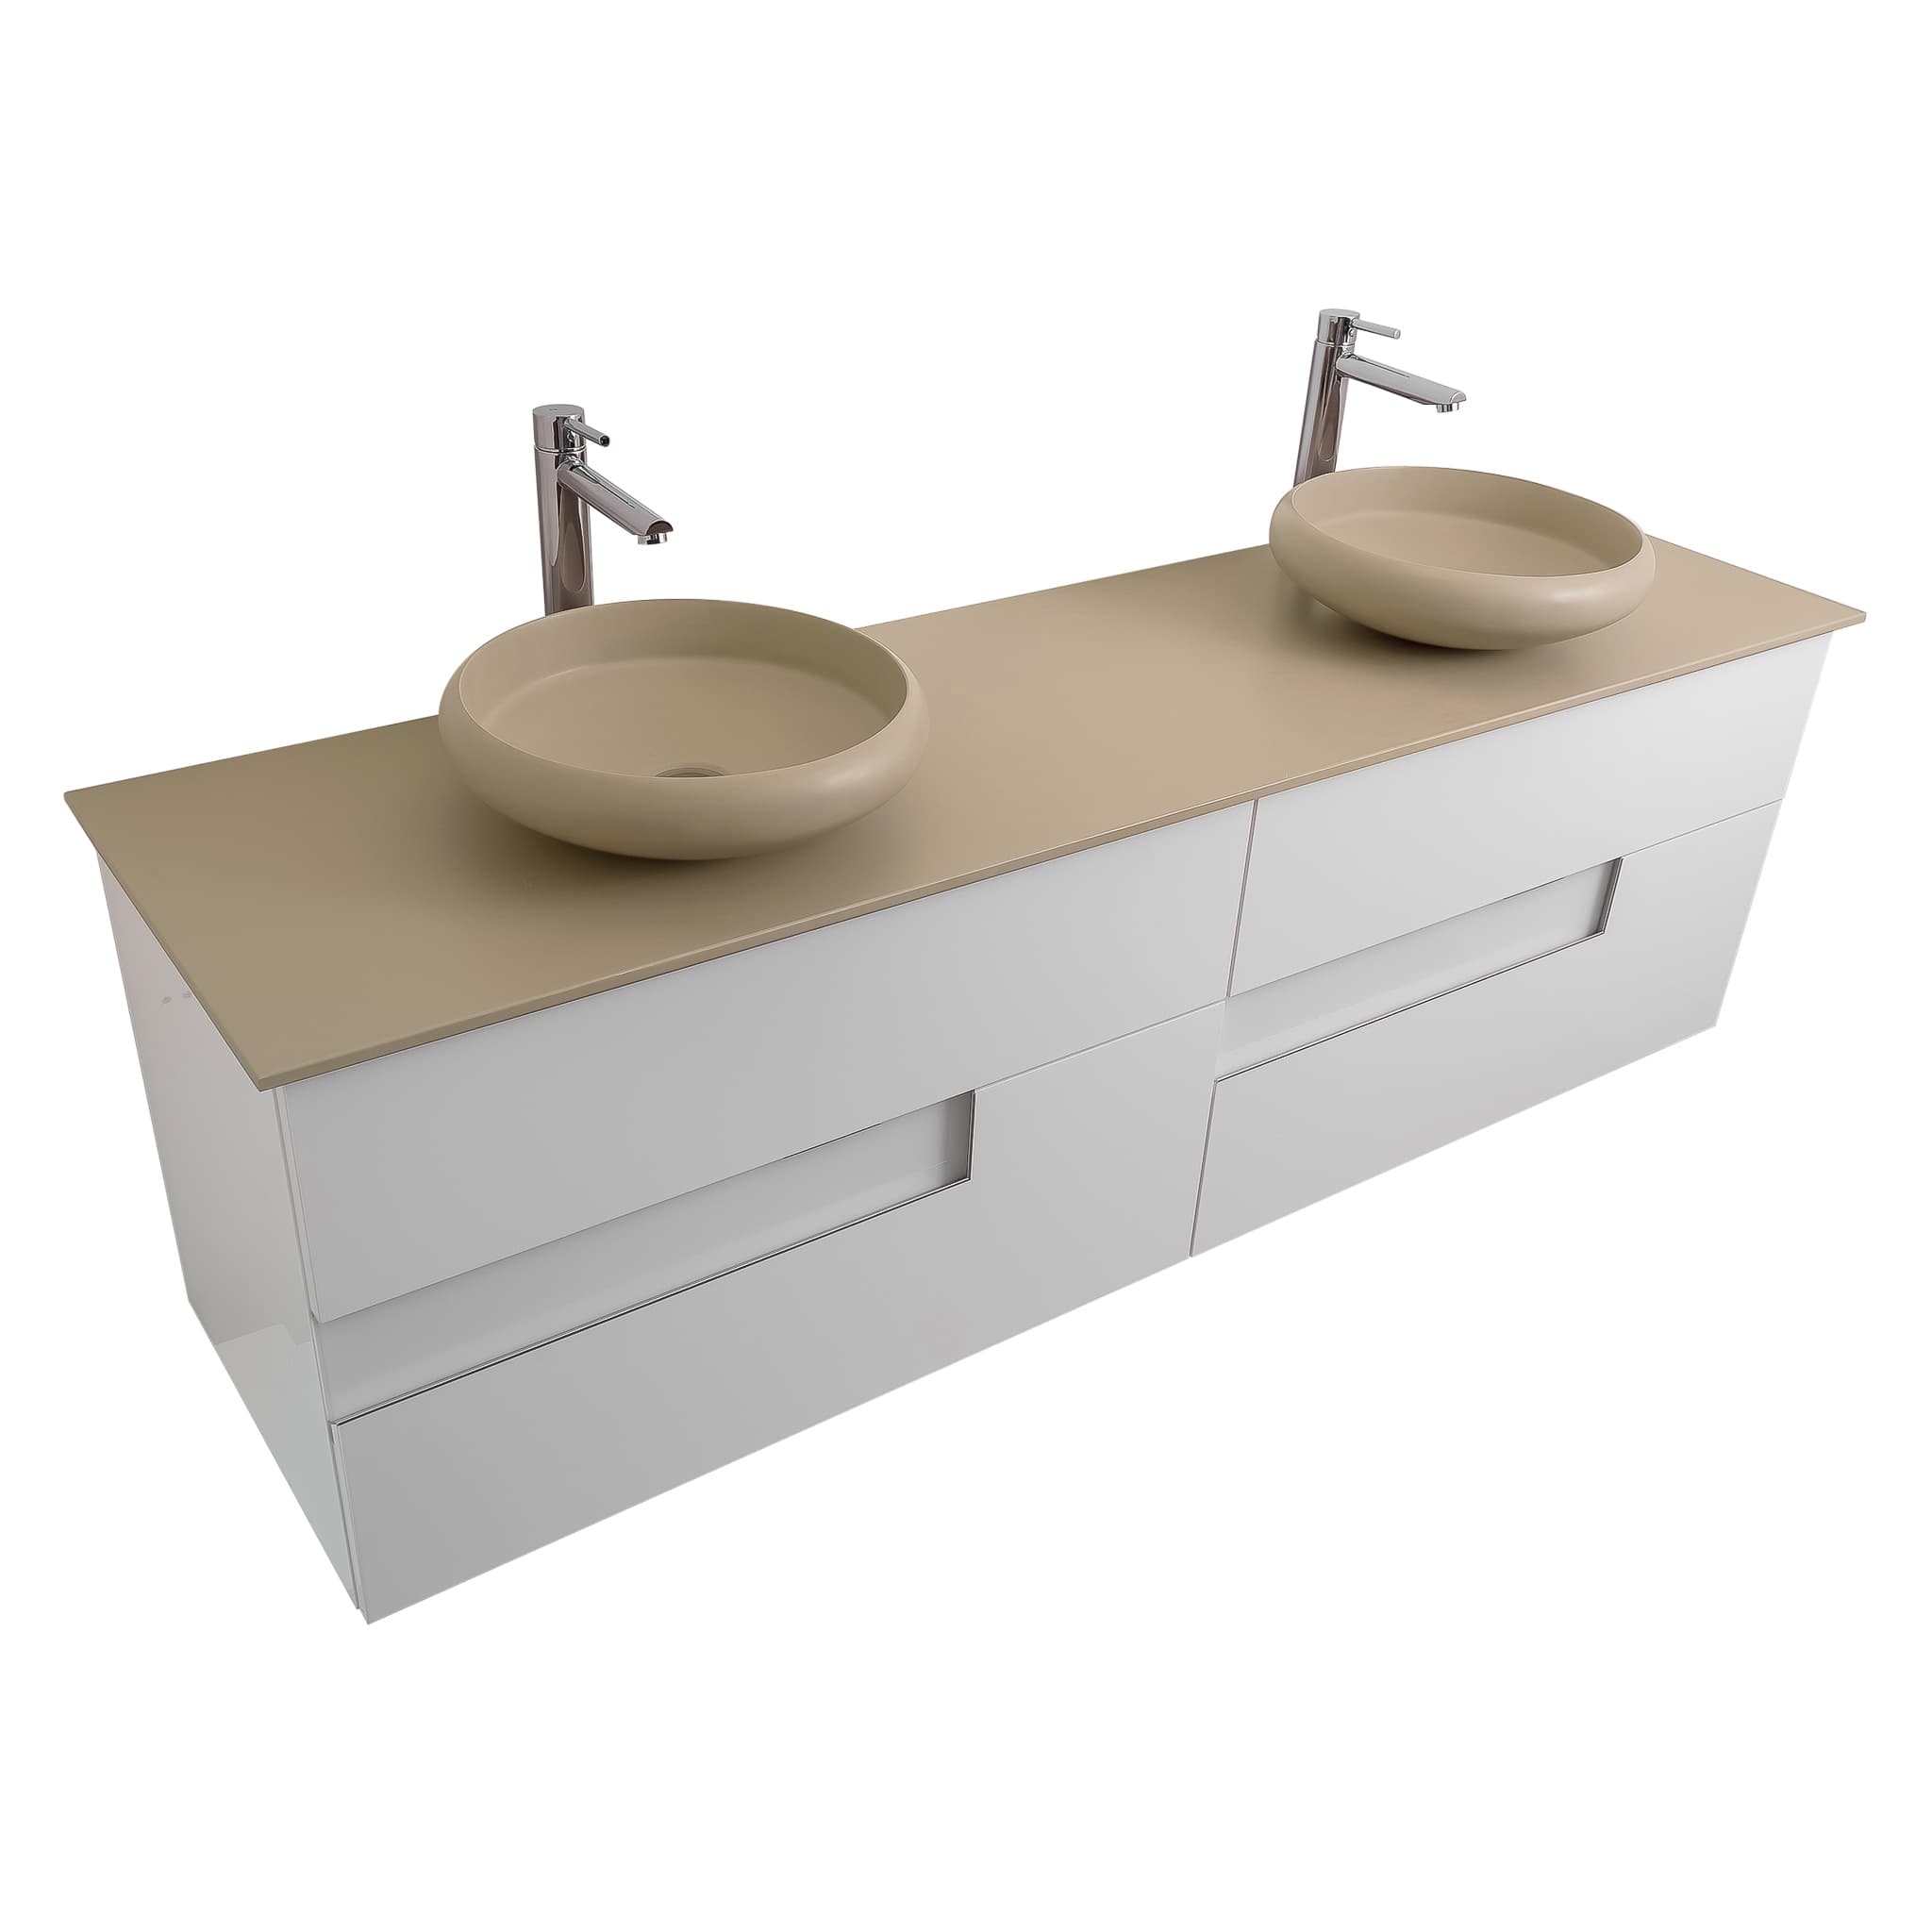 Vision 72 White High Gloss Cabinet, Solid Surface Flat Taupe Counter And Two Round Solid Surface Taupe Basin 1153, Wall Mounted Modern Vanity Set